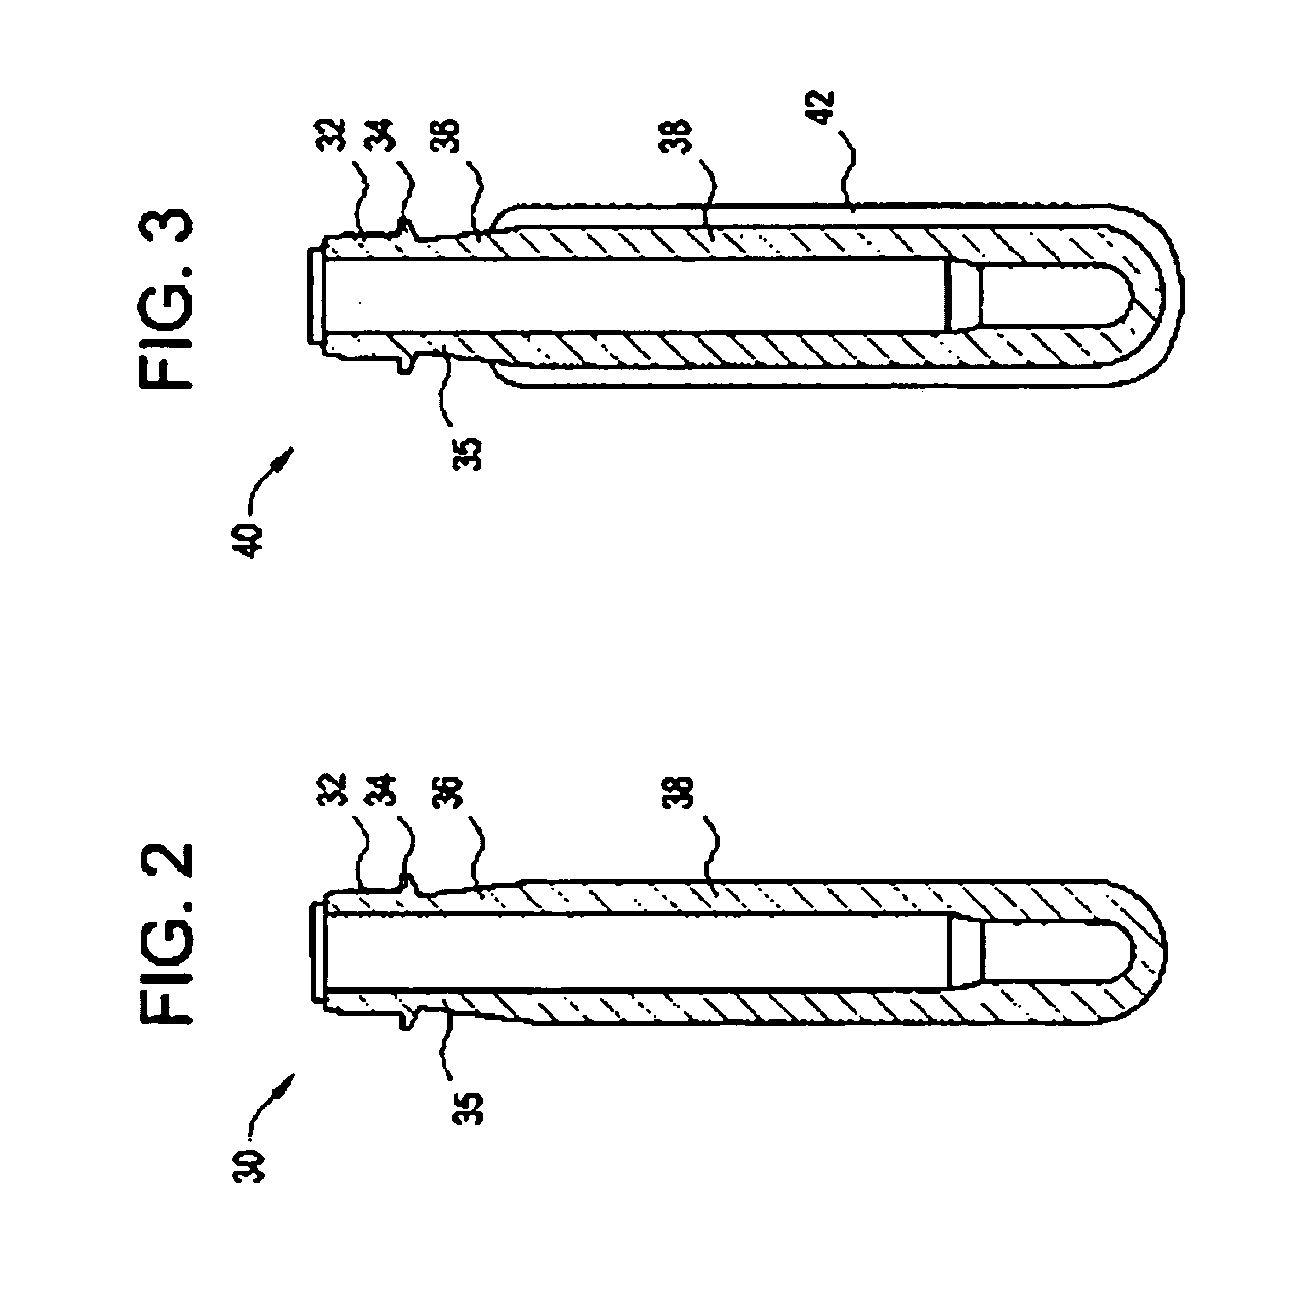 Overmolded containers and methods of manufacture and use thereof